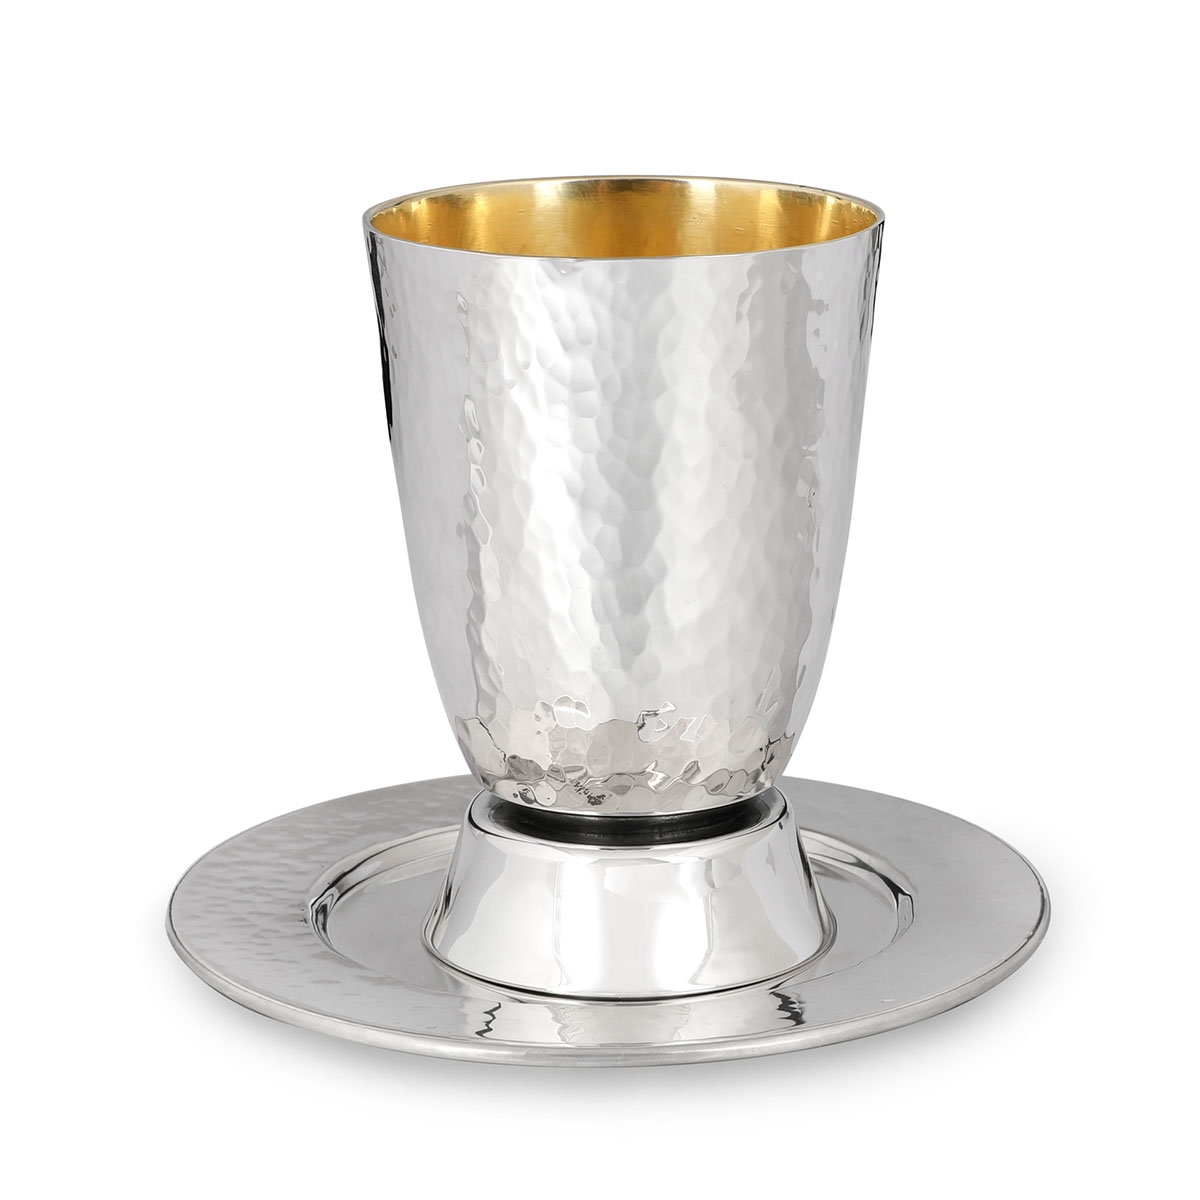 Bier Judaica Handcrafted 925 Sterling Silver Kiddush Cup With Hammered Finish - 1